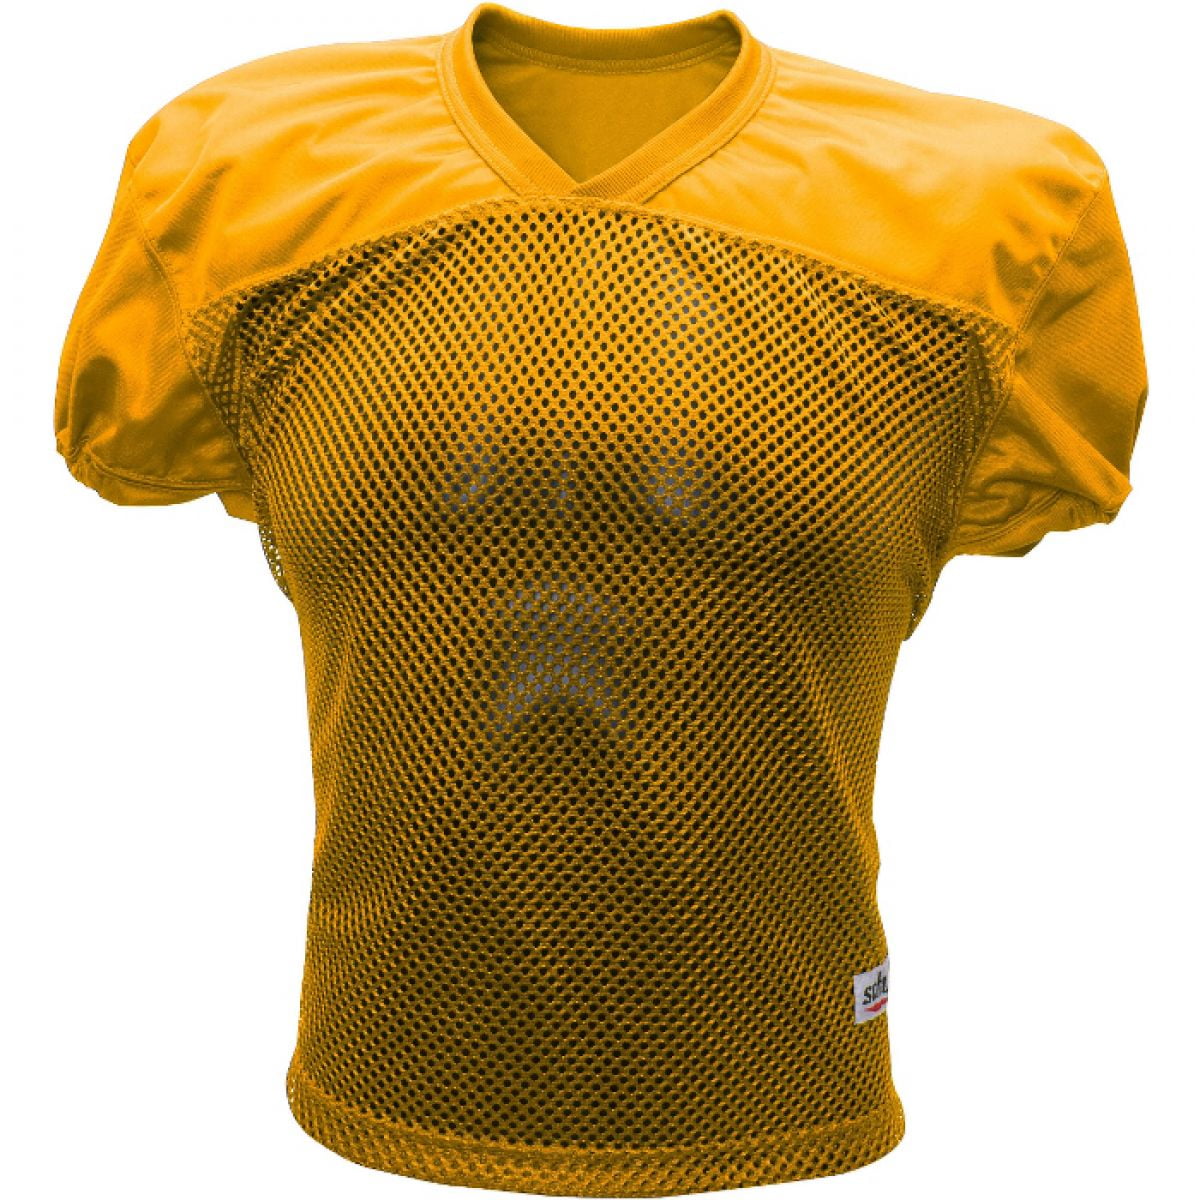 nfl jersey with elastic sleeves